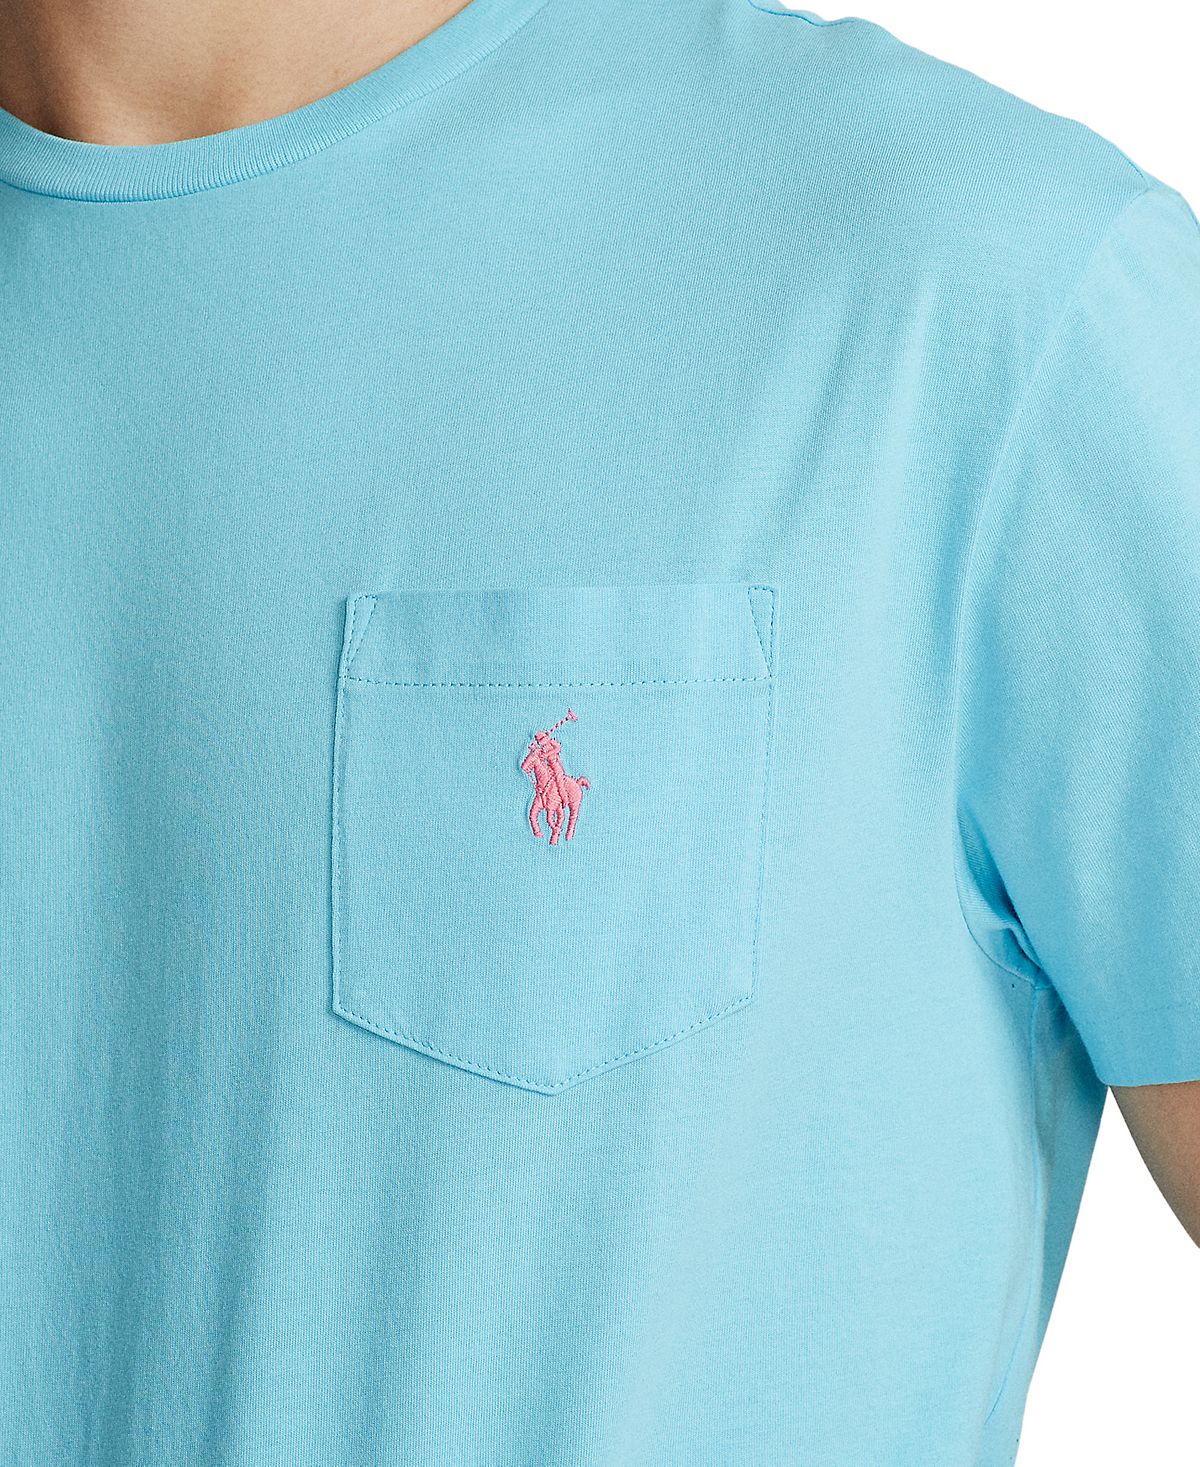 Polo Ralph Lauren Classic Fit Crew Neck Pocket T-shirt French Turquoise